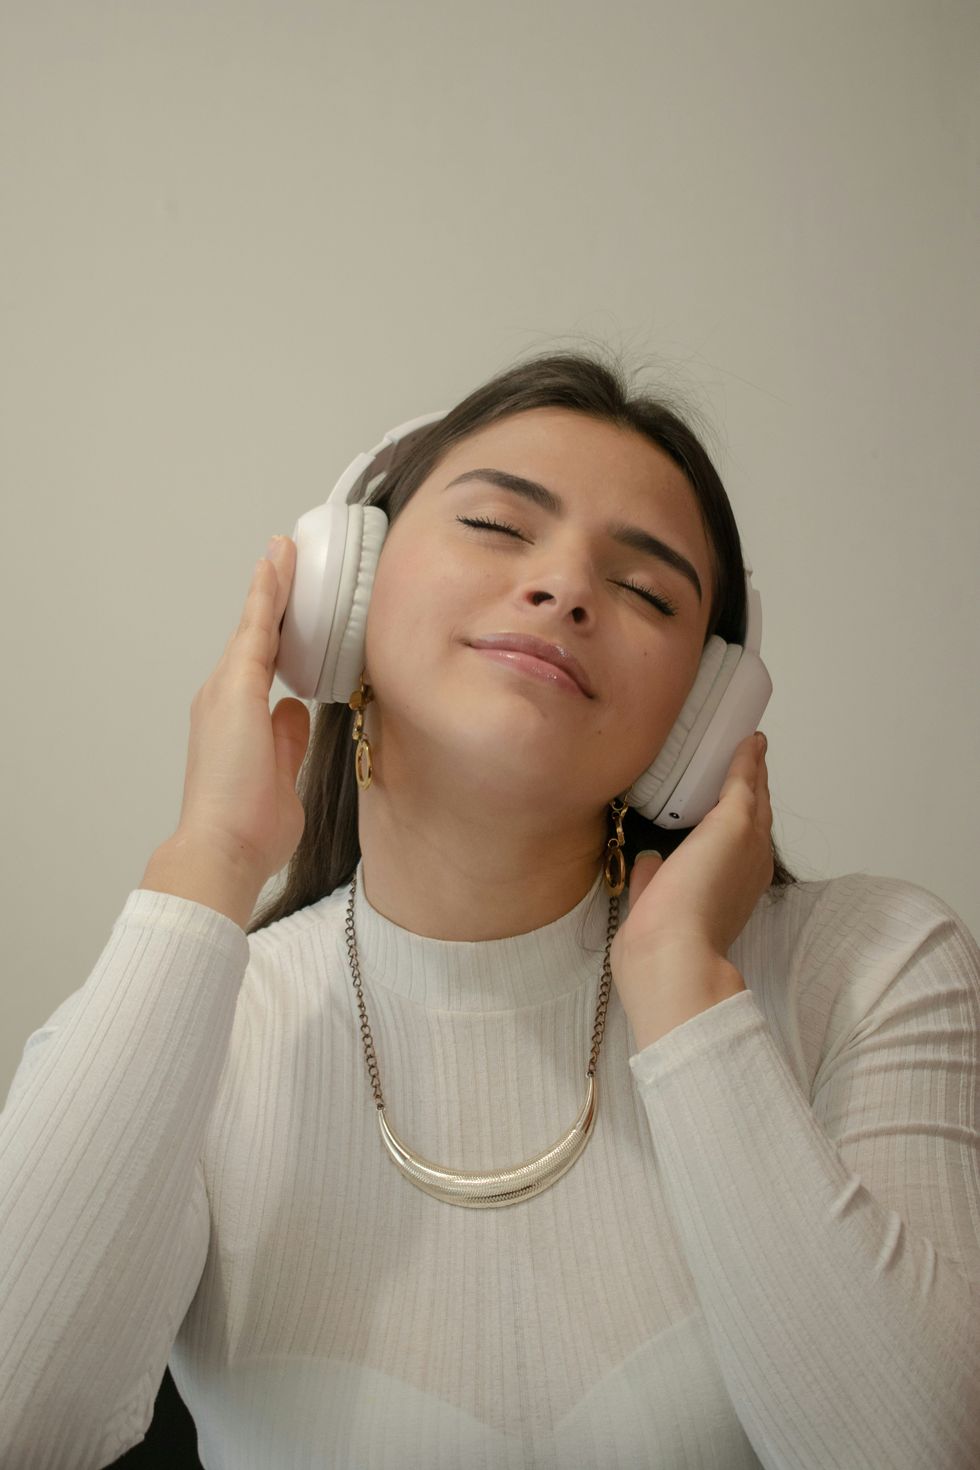 A lady wearing white headphones listening to music